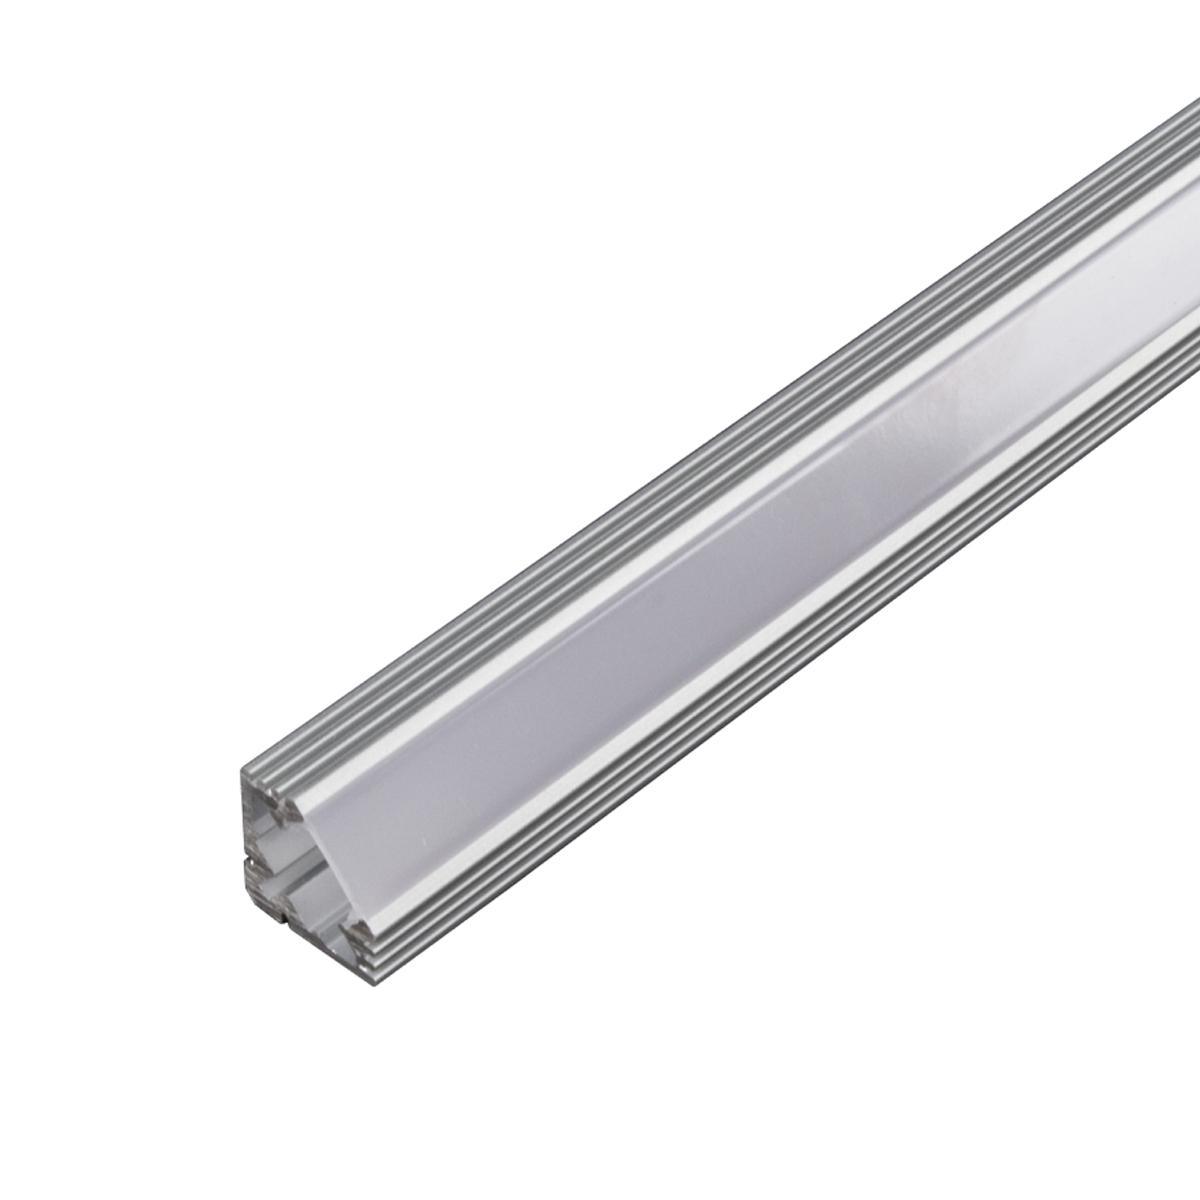 4ft Aluminum Channel for LED Strip and Tape Light, 45° Angle